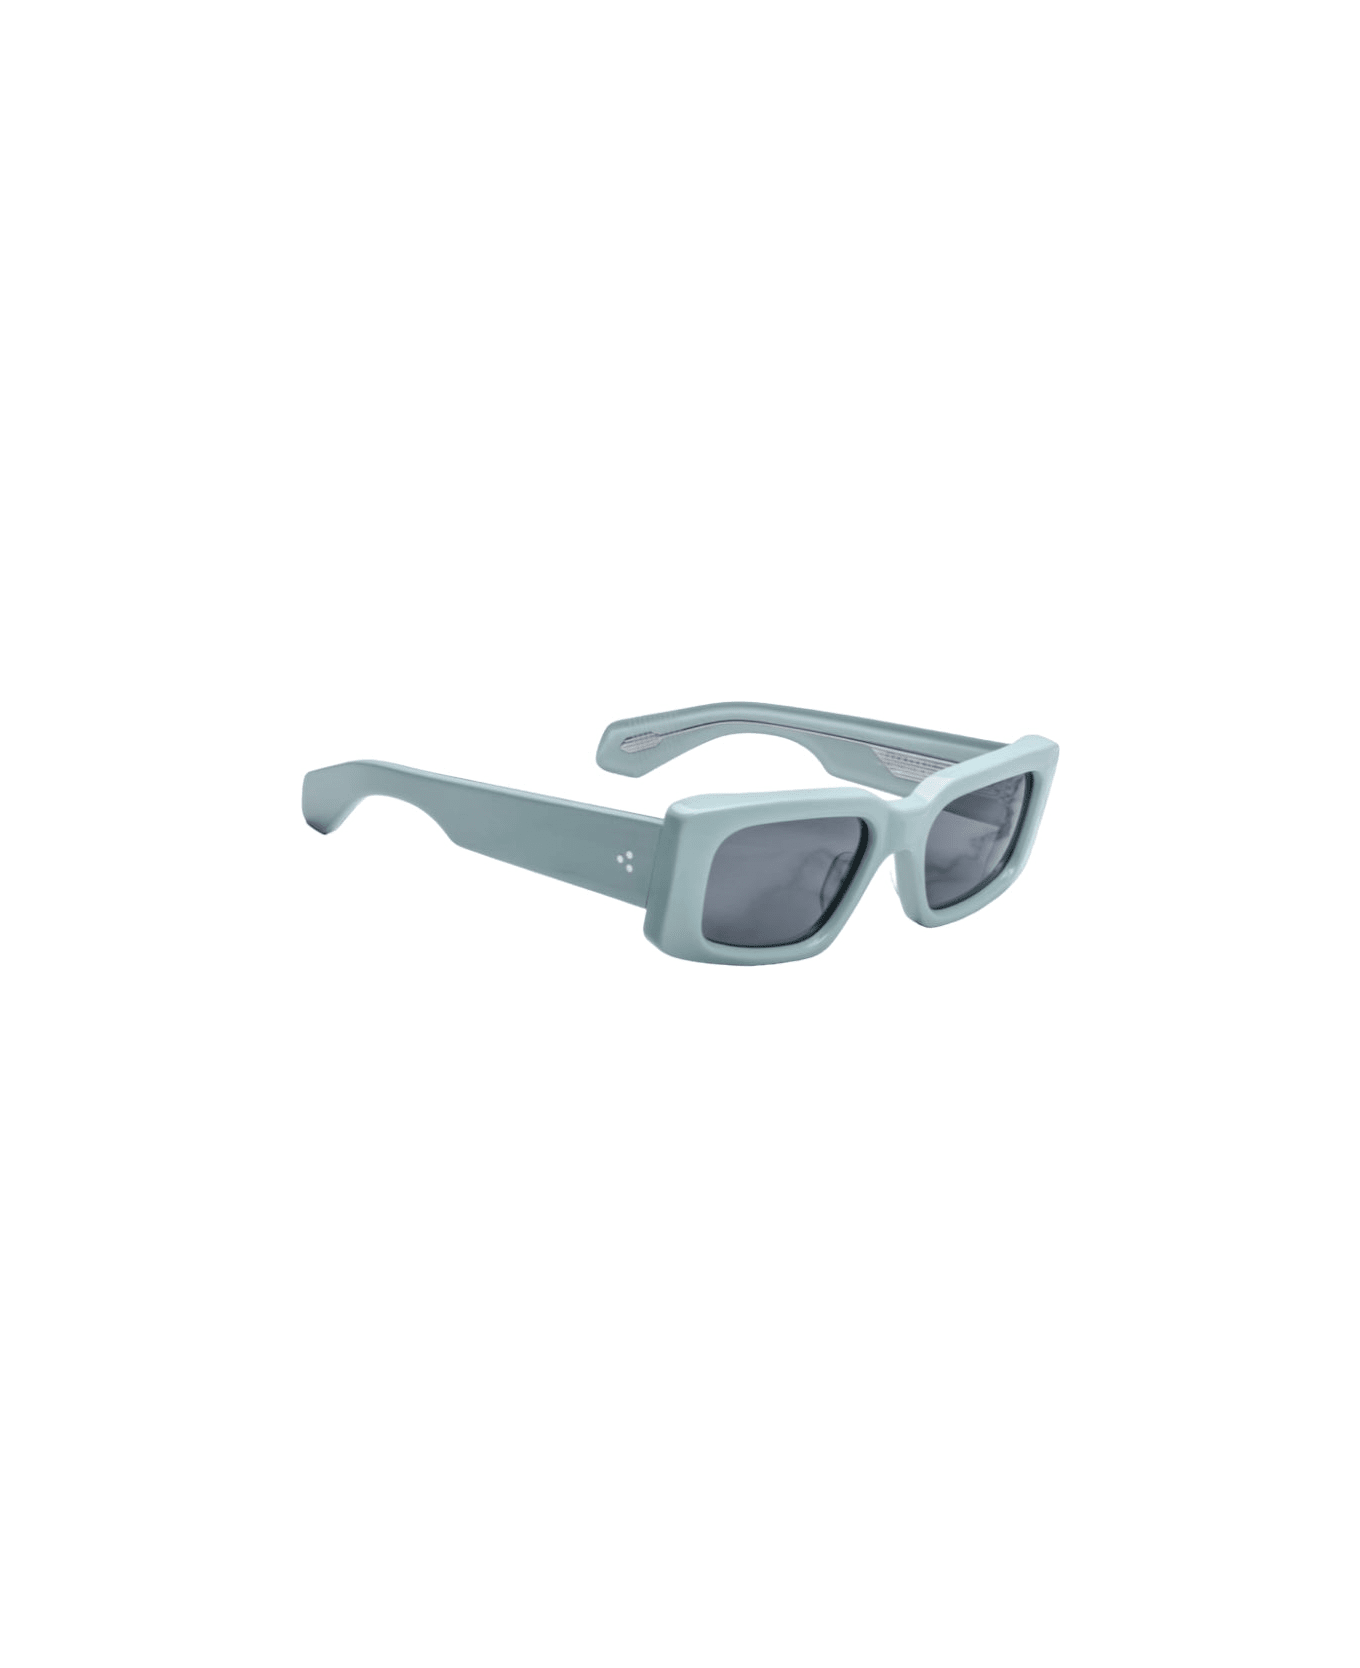 Jacques Marie Mage Supersonic - Glassier Sunglasses サングラス